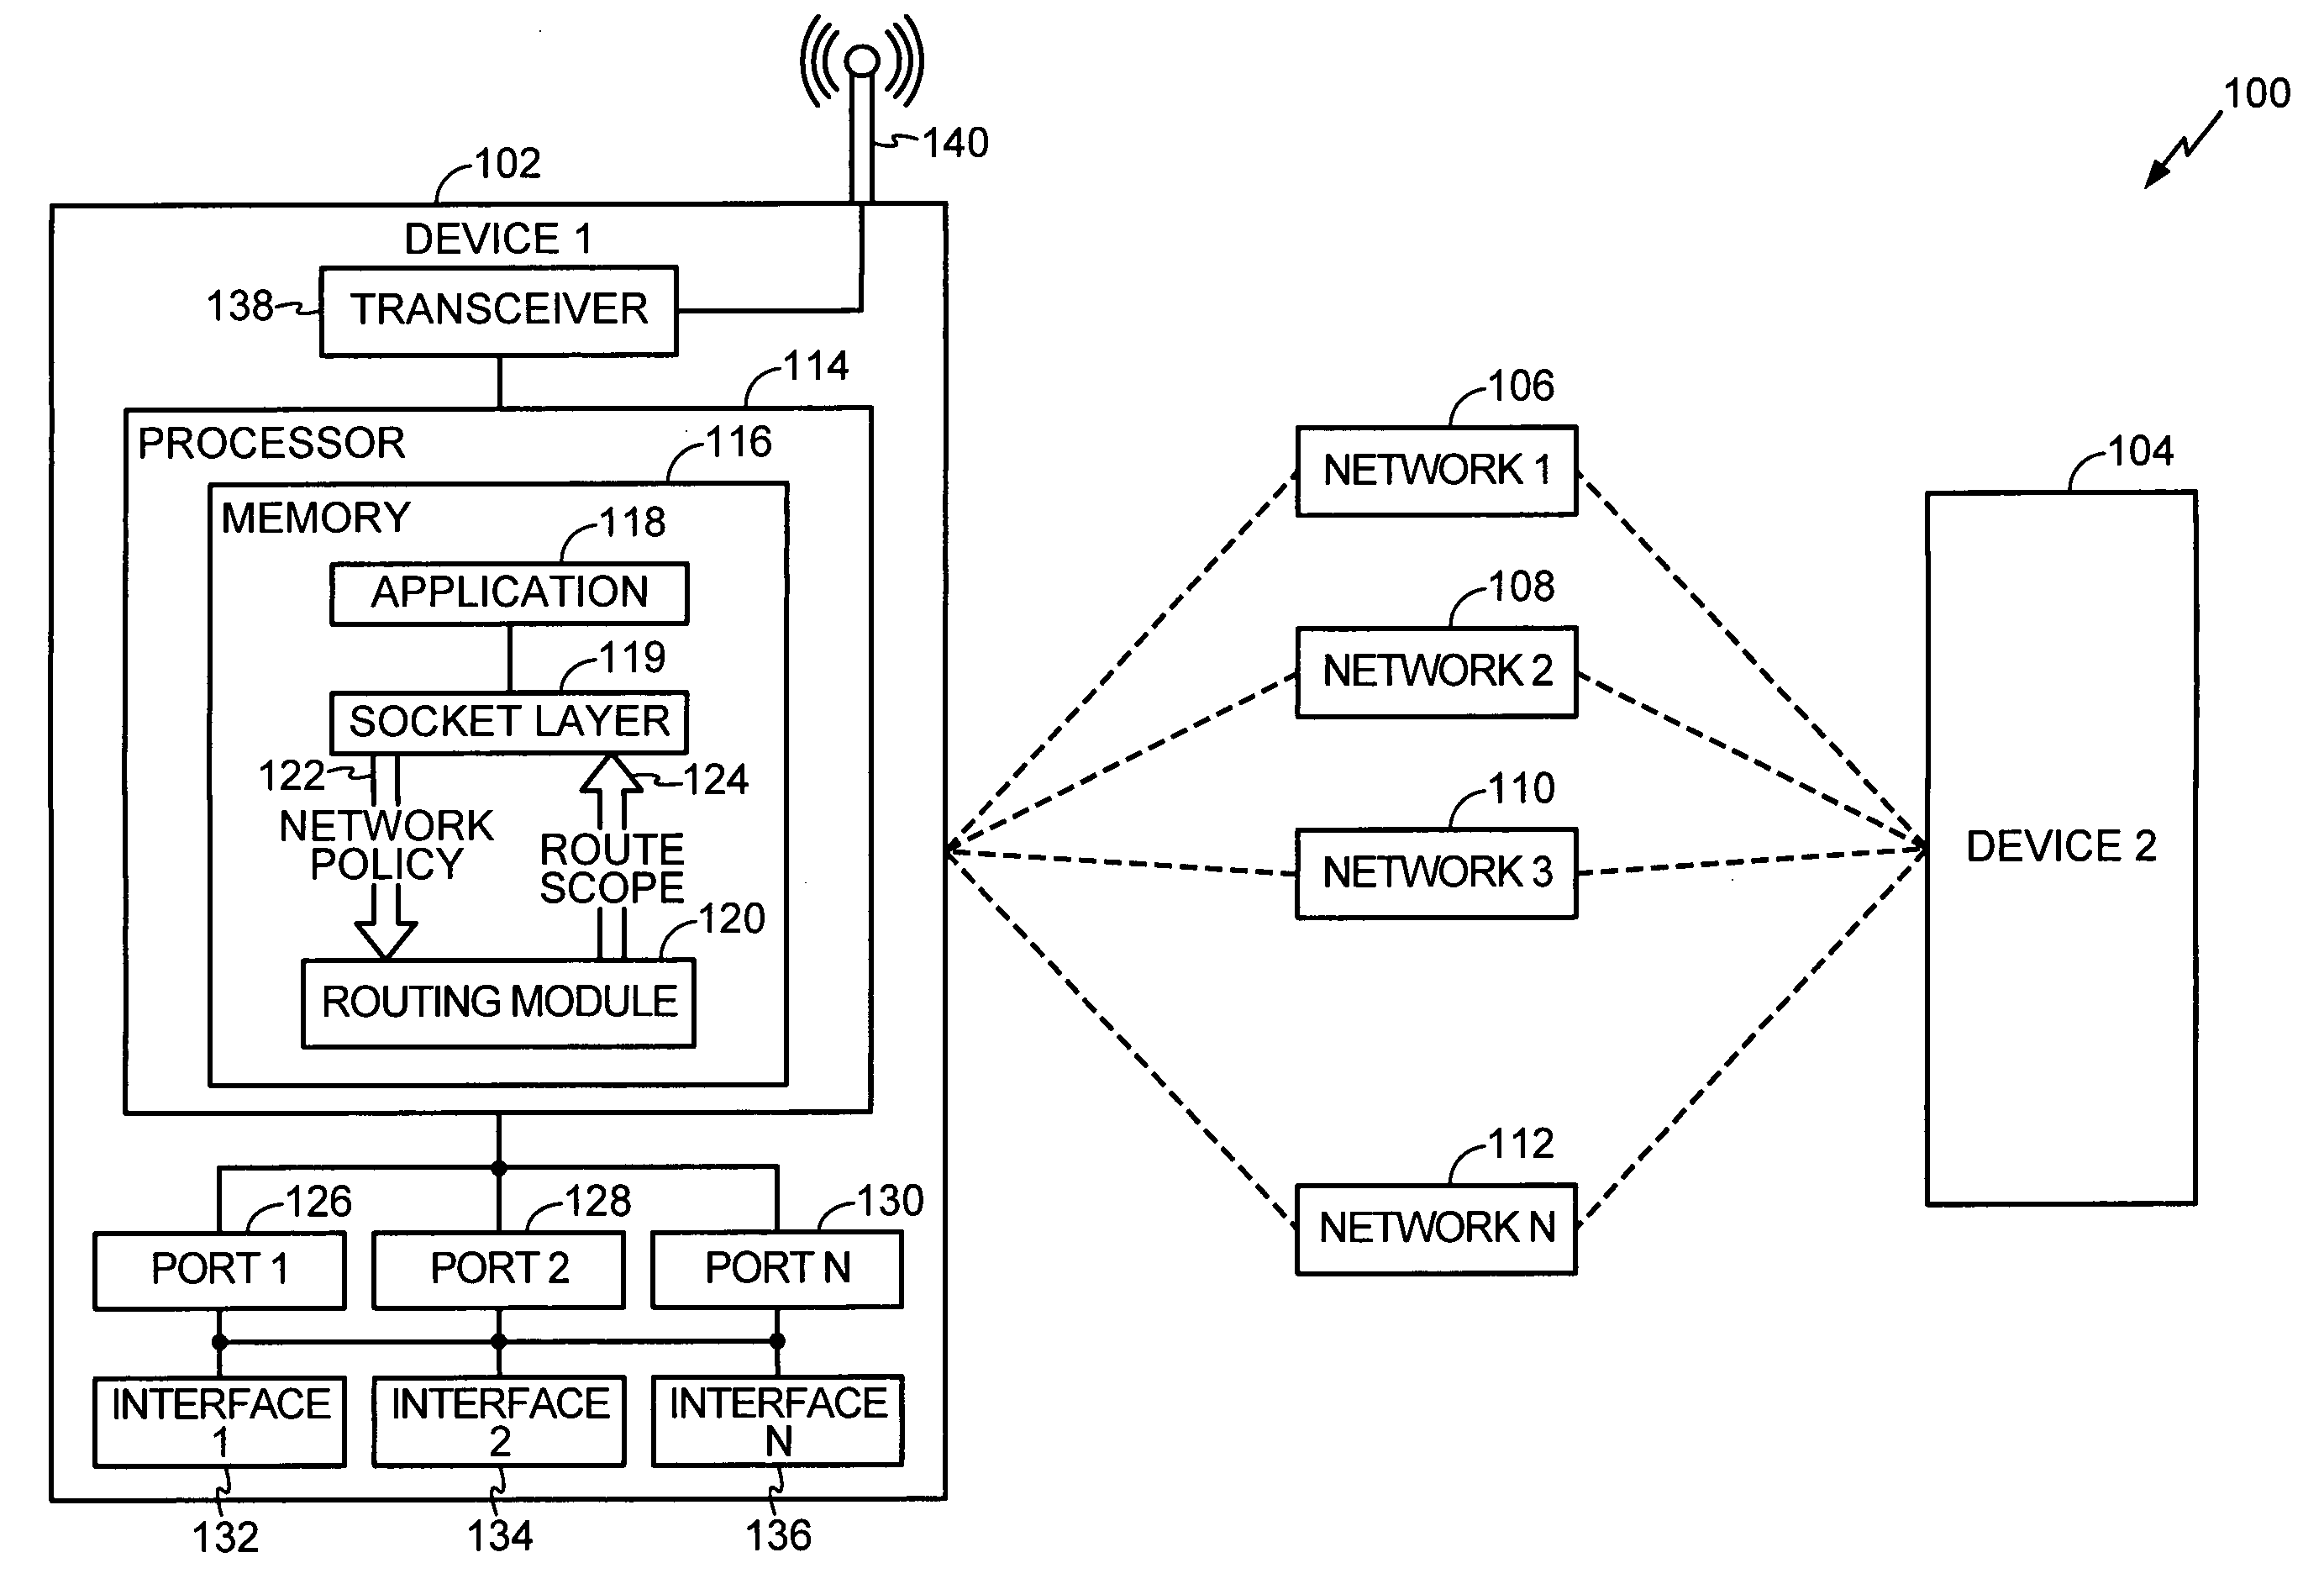 System and method to support data applications in a multi-homing, multi-mode communication device